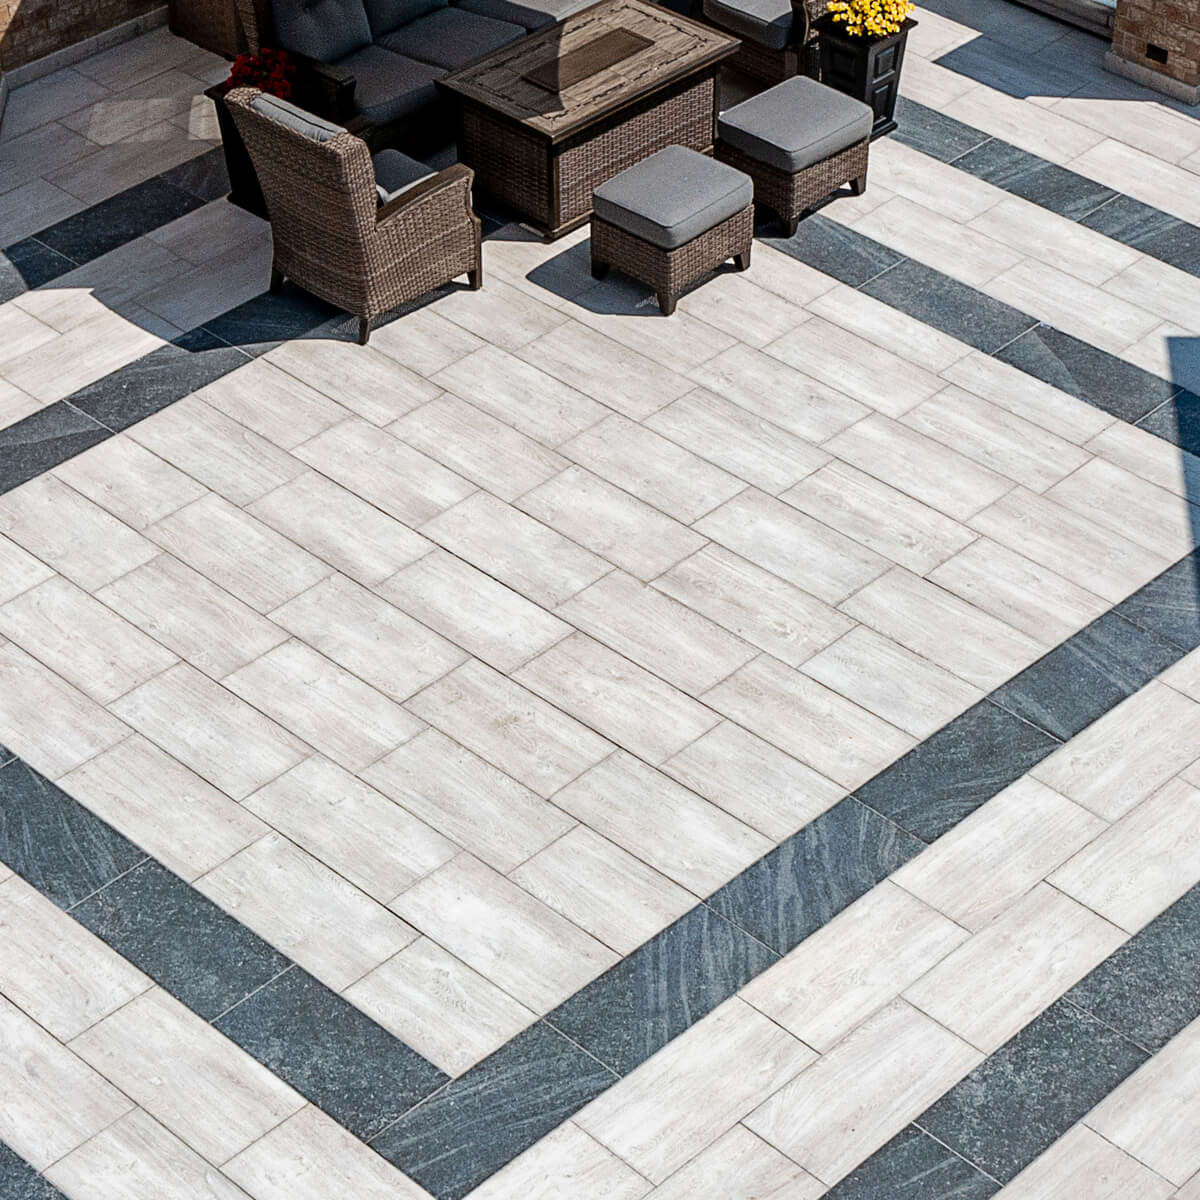 Unilock Porcelain Tile Patio with Contrasting Boarders